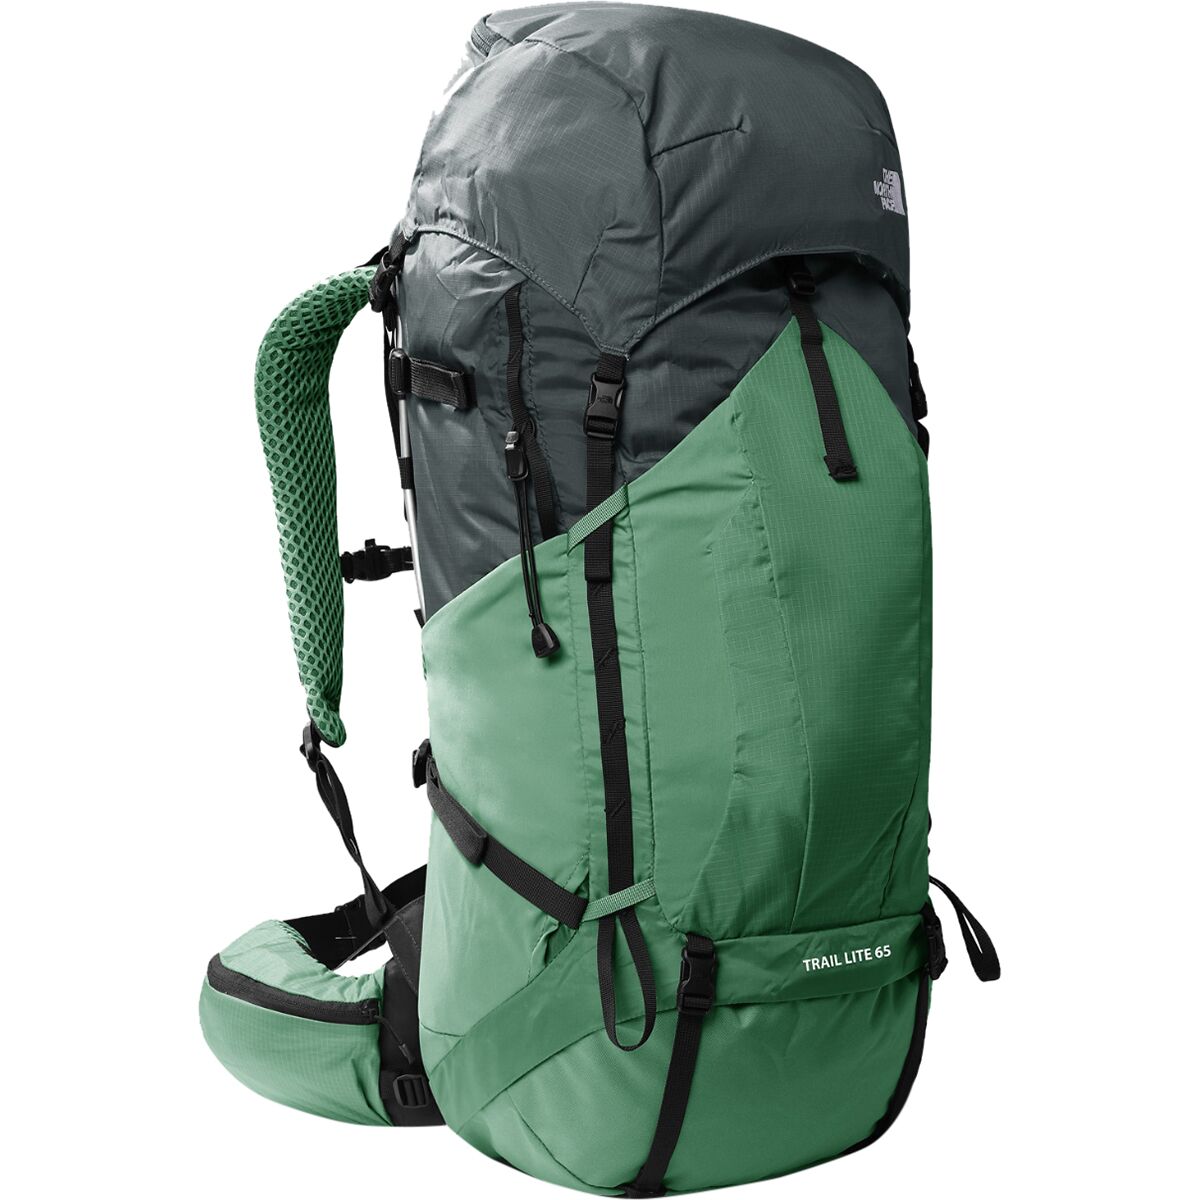 The North Face Trail Lite 65L Backpack - Hike & Camp